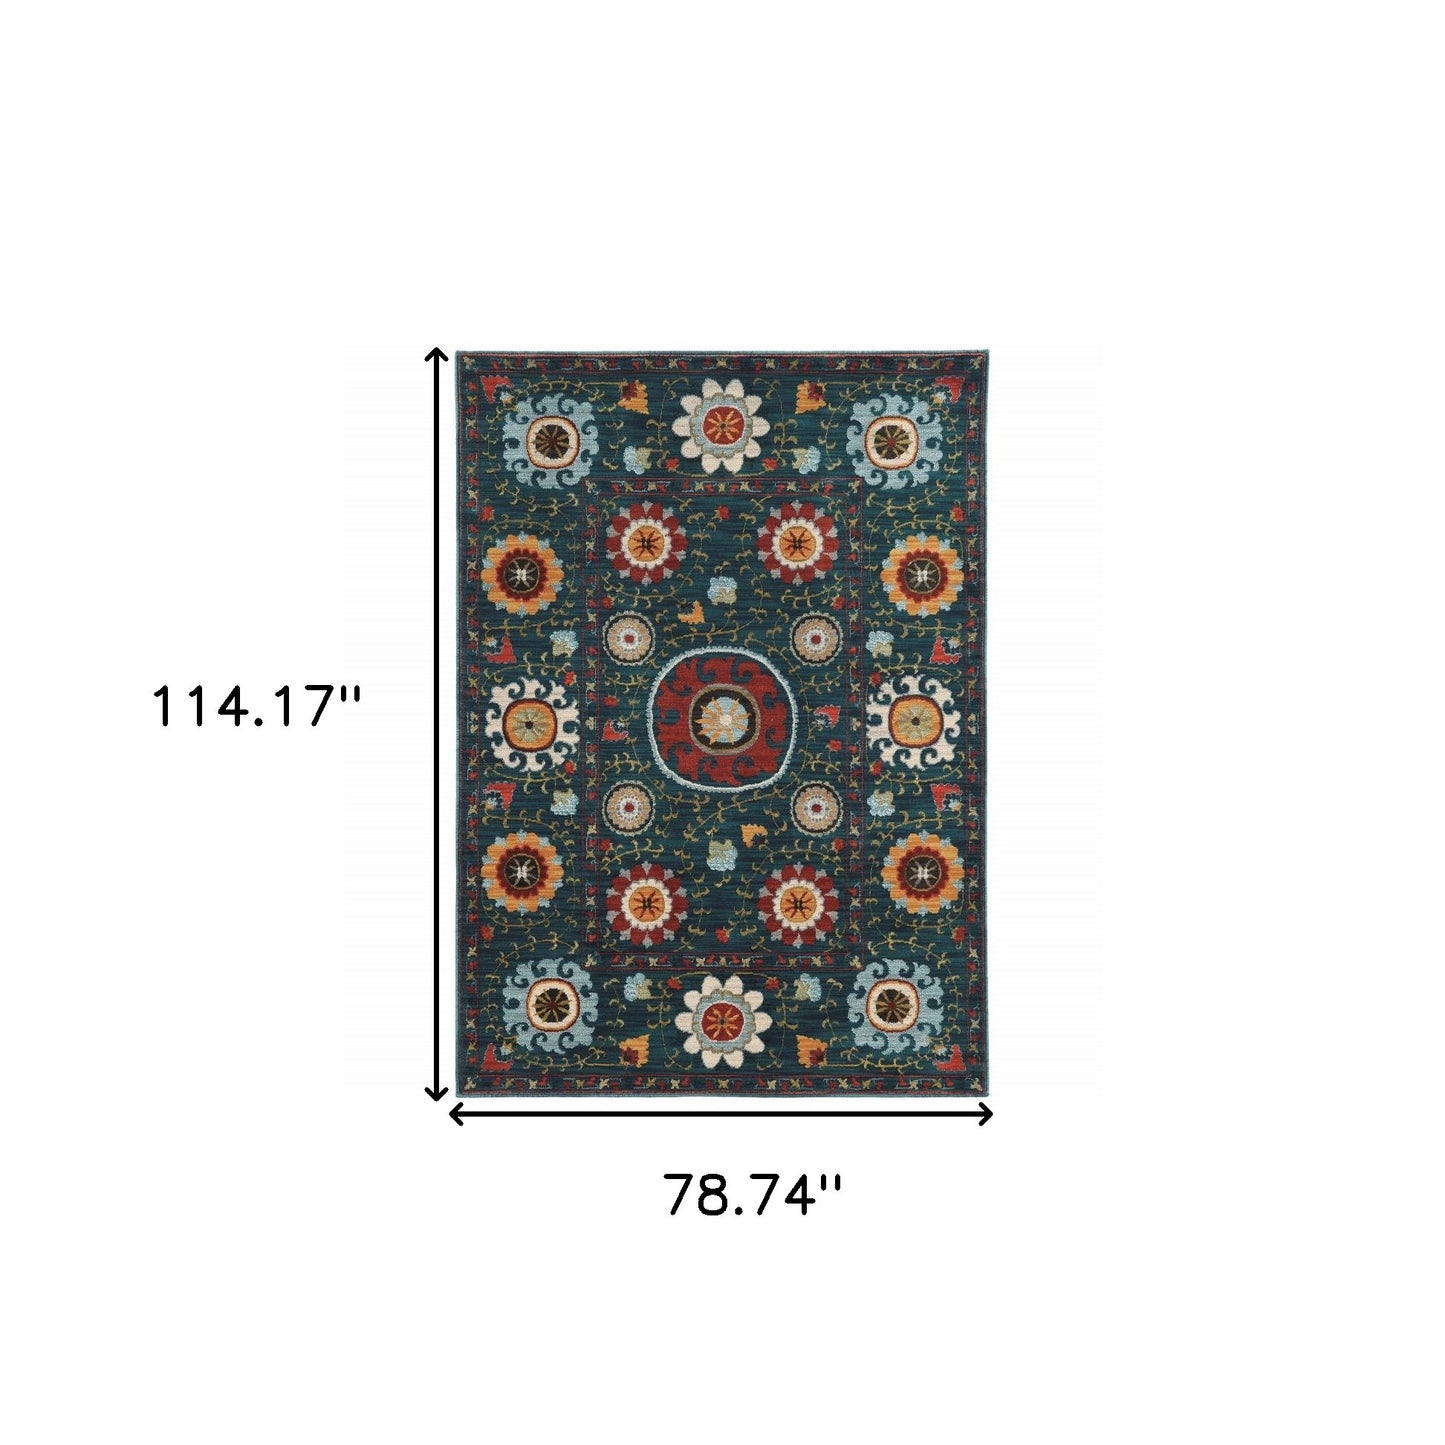 6' X 9' Teal Blue Rust Gold And Ivory Floral Power Loom Stain Resistant Area Rug